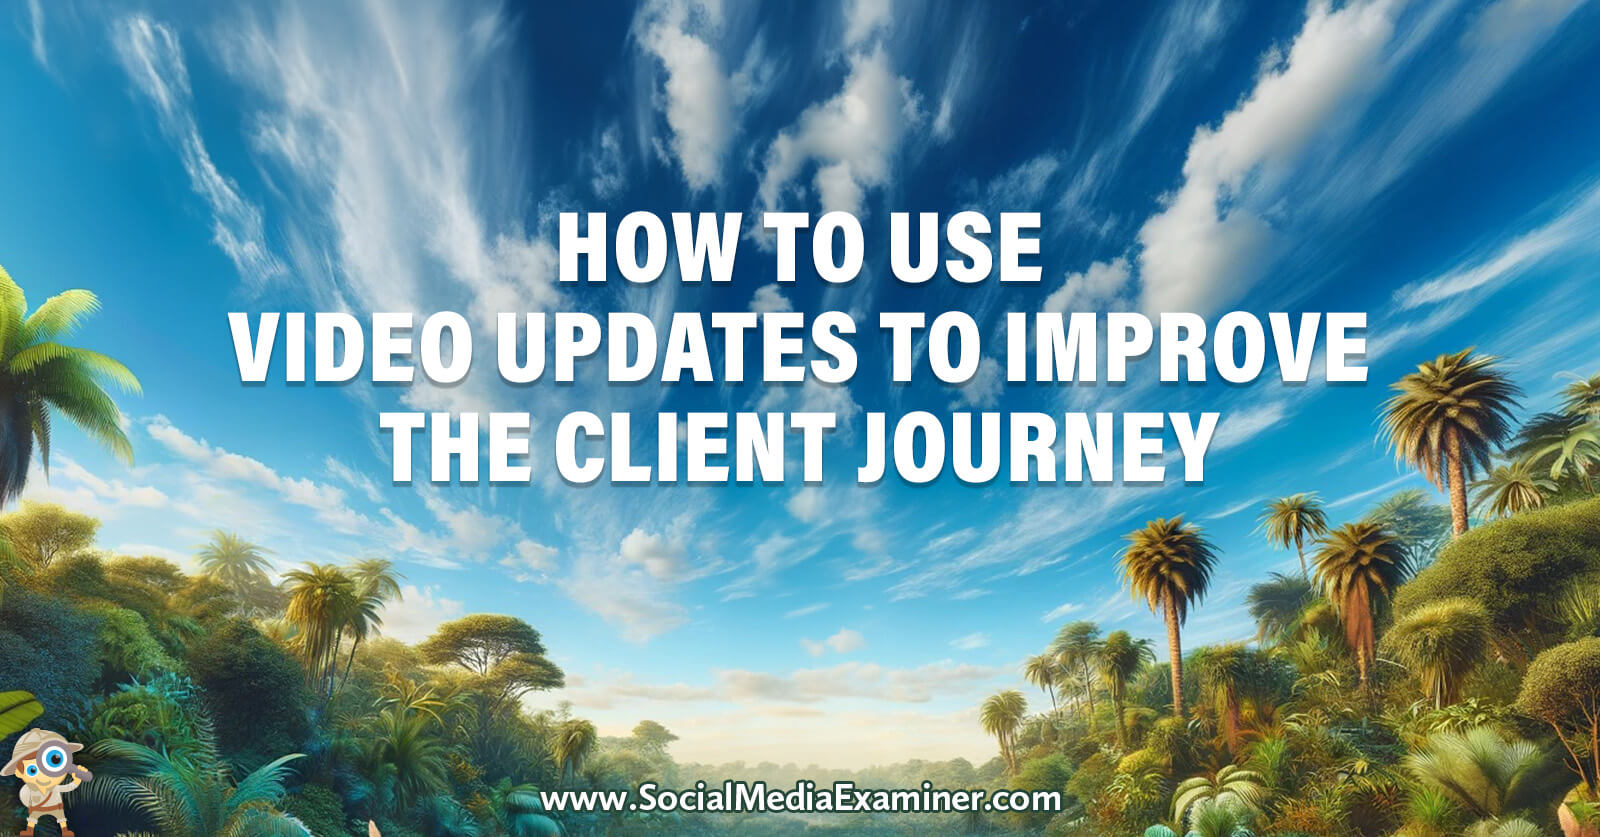 How to Use Video Updates to Improve the Client Journey by Social Media Examiner